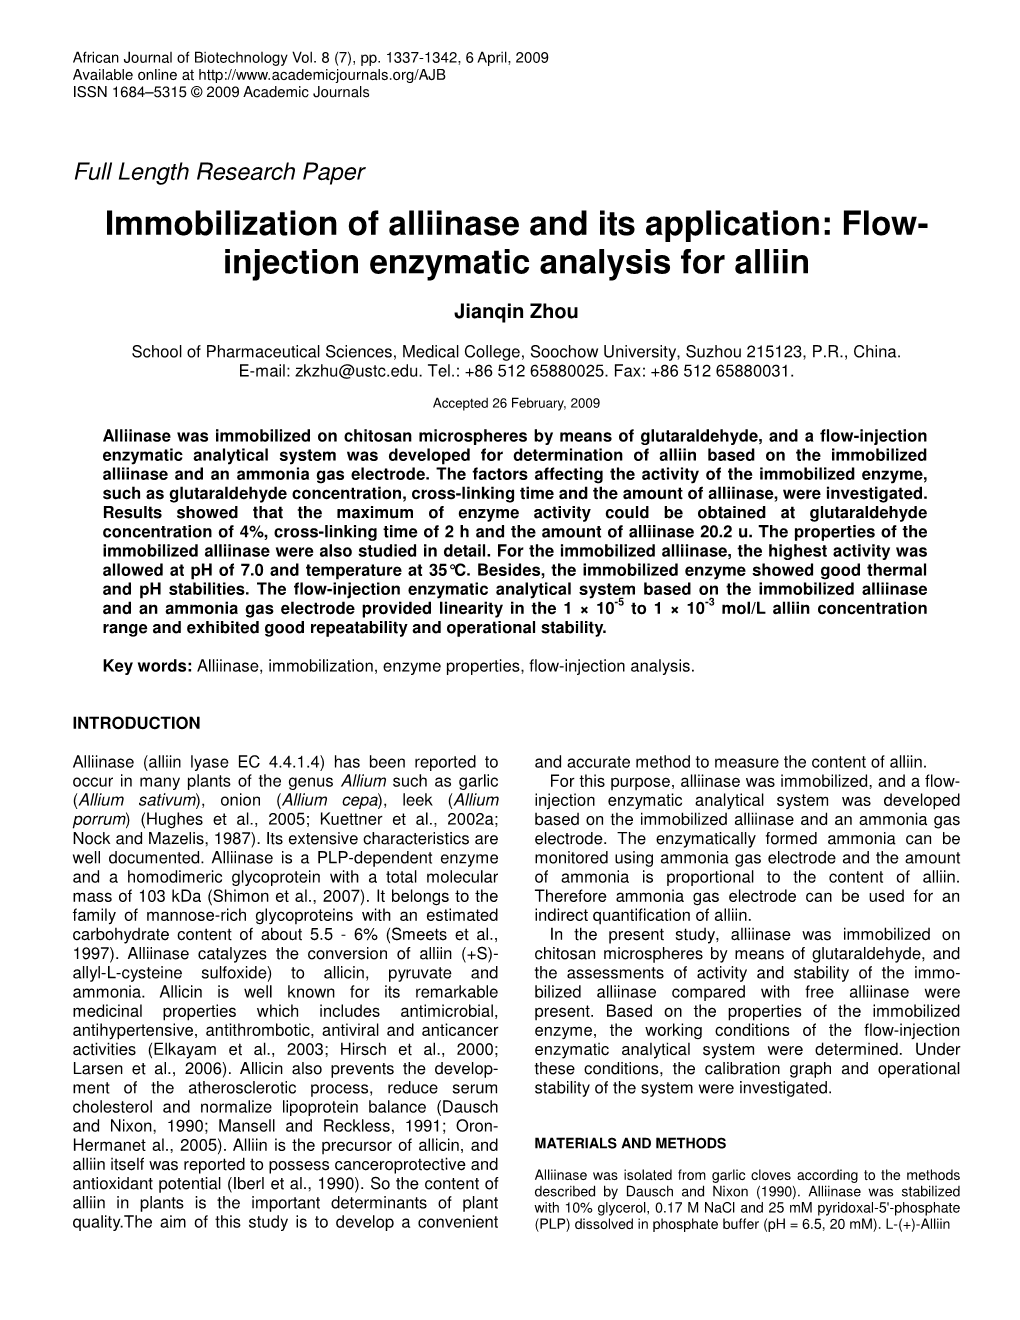 Immobilization of Alliinase and Its Application: Flow- Injection Enzymatic Analysis for Alliin